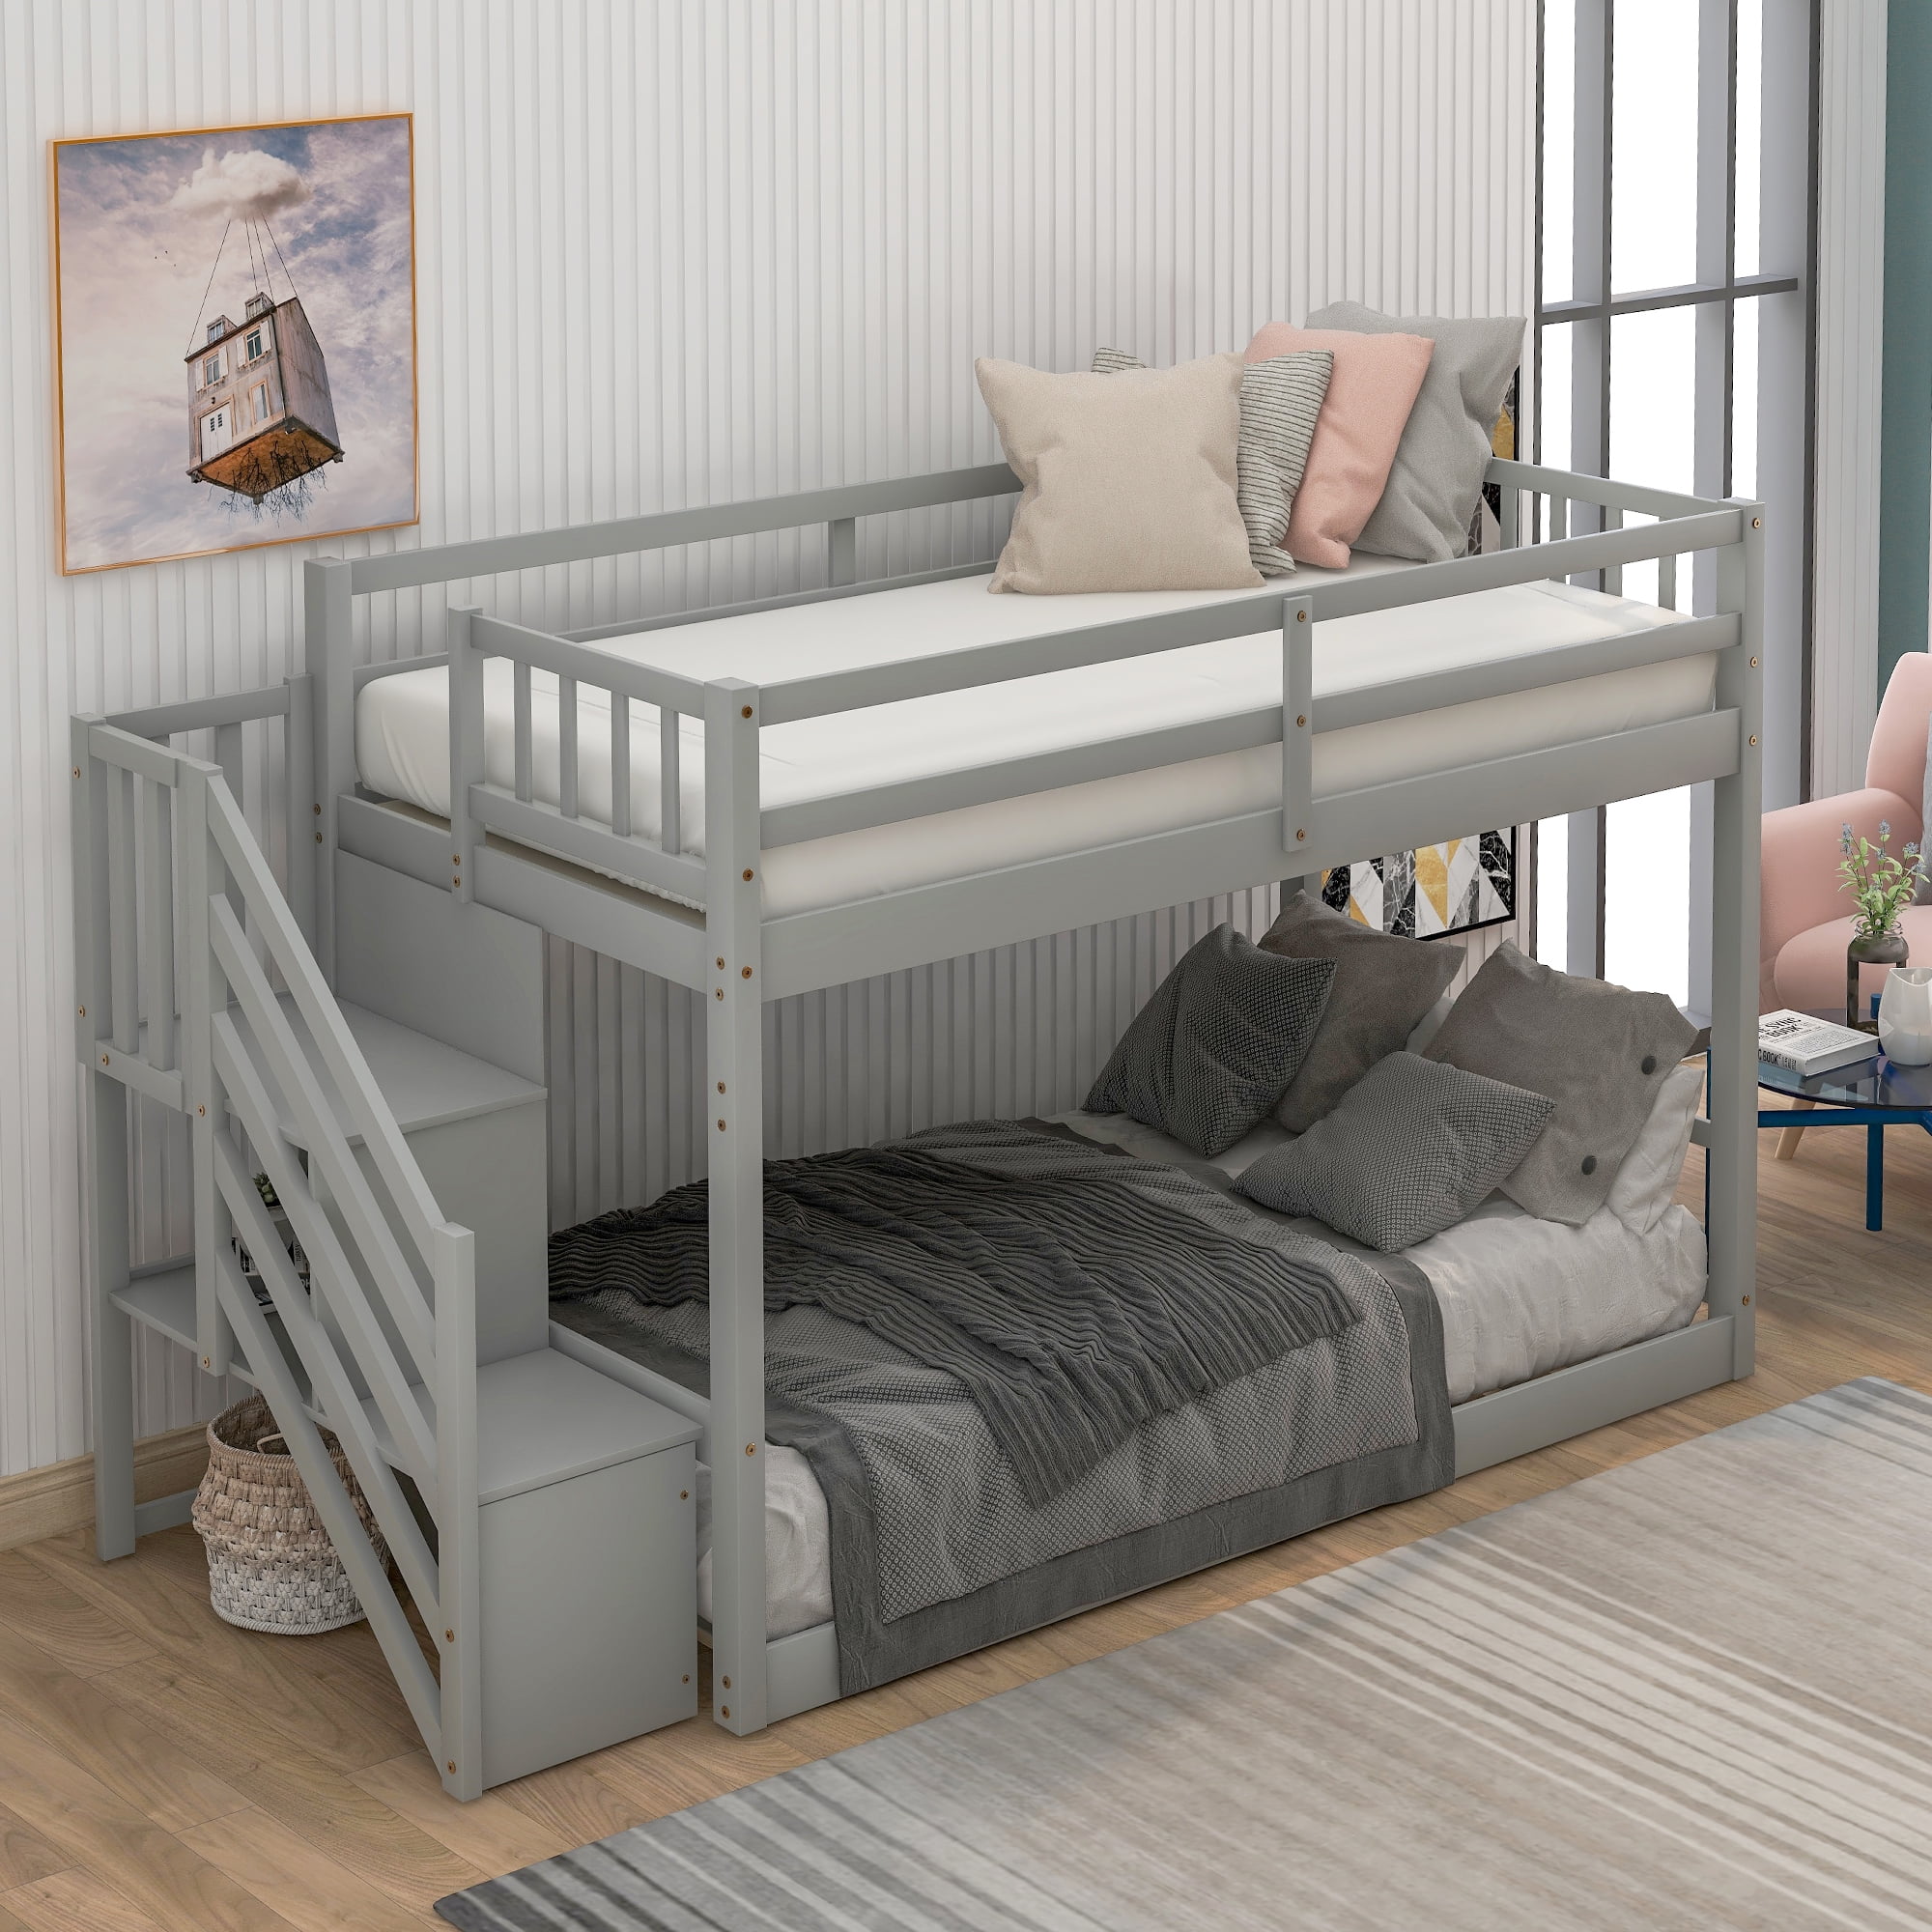 Euroco Wood Twin Over Floor Bunk, Twin Bunk Beds For Boys